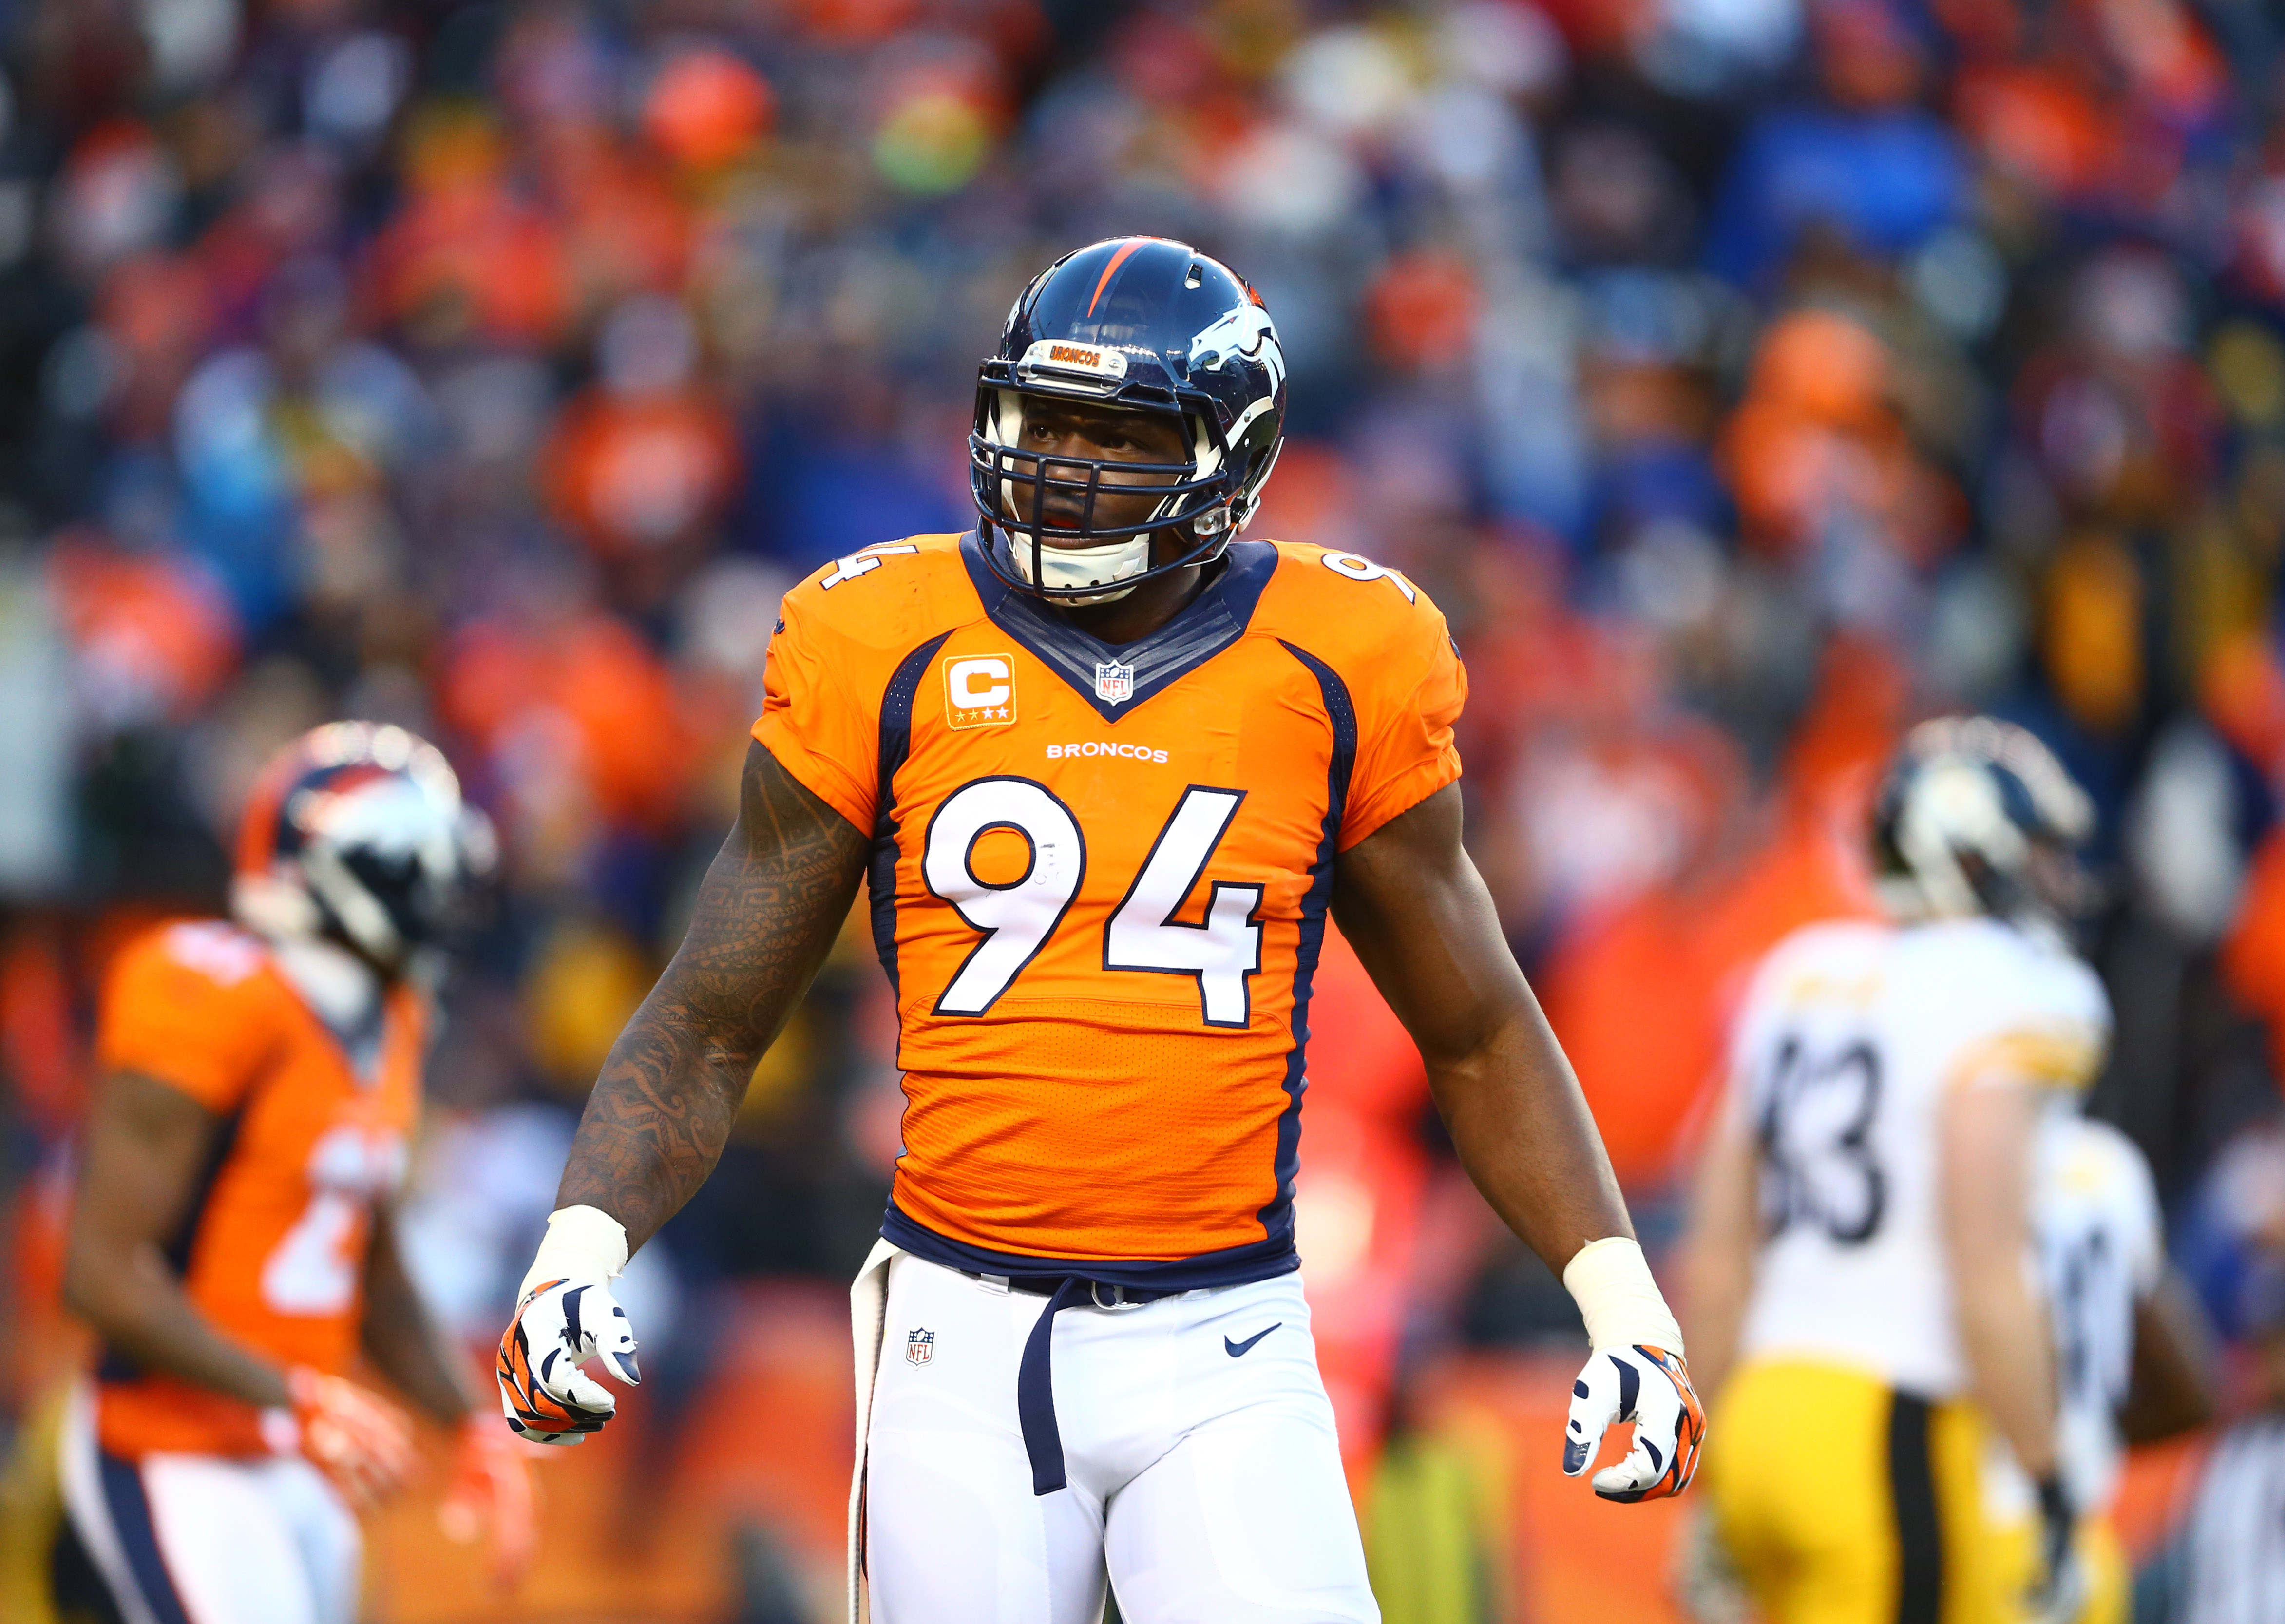 Denver's DeMarcus Ware knew he had something left to give NFL